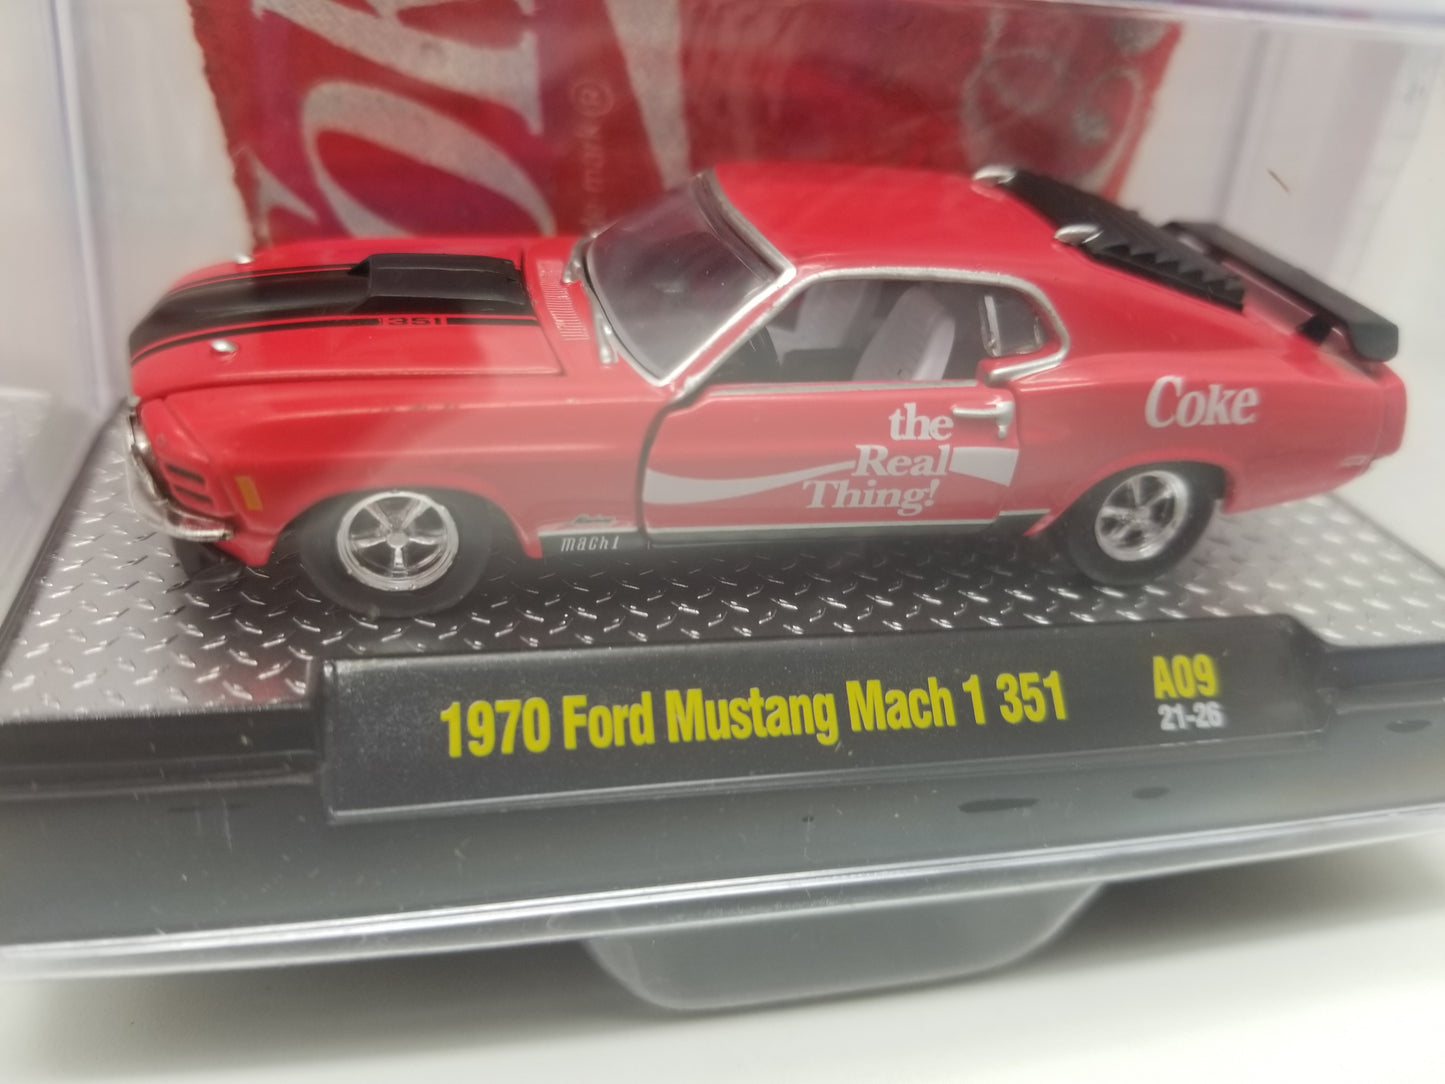 M2 1970 Ford Mustang Mach 1 351- Coca-Cola